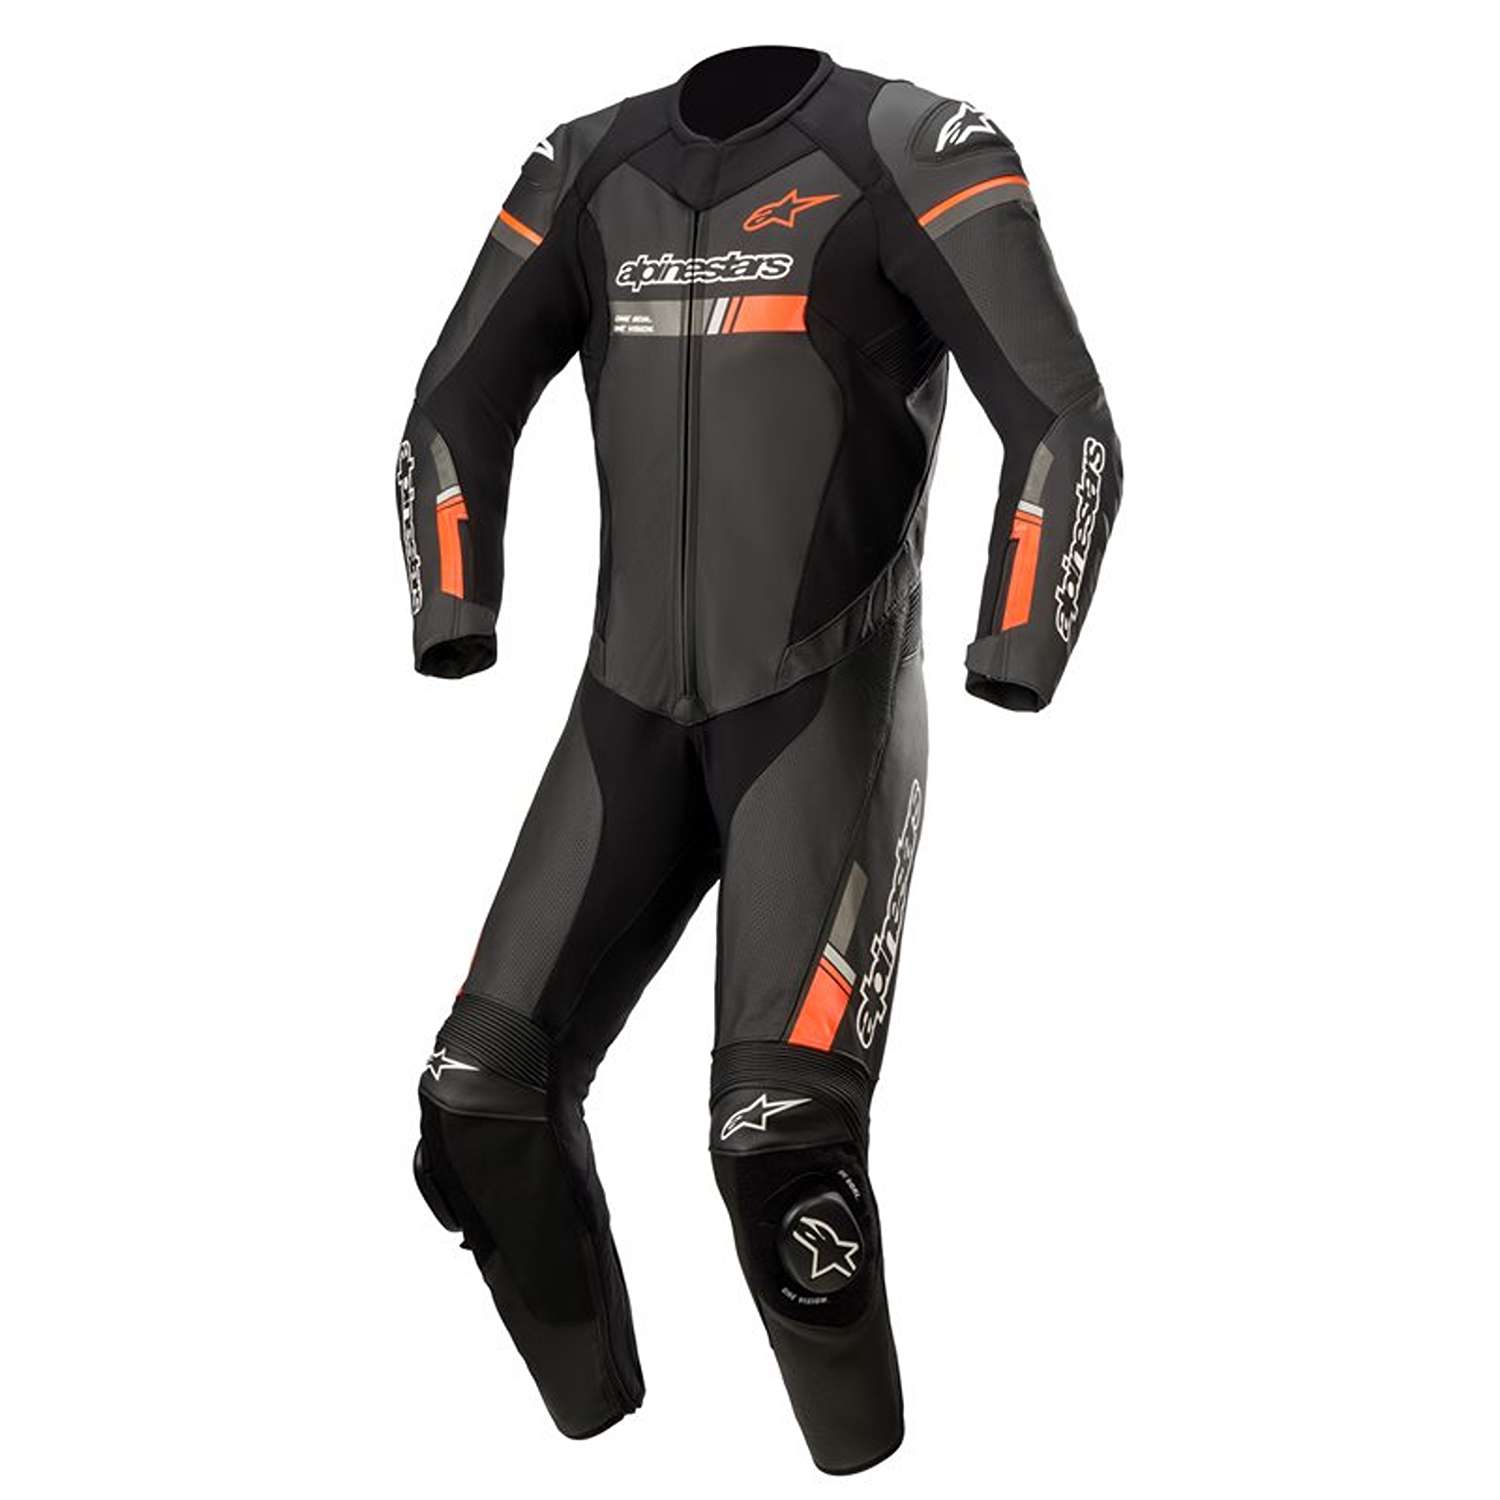 Image of Alpinestars Gp Force Chaser Leather Suit 1 Pc Black Red Fluo Size 54 ID 8059175351501